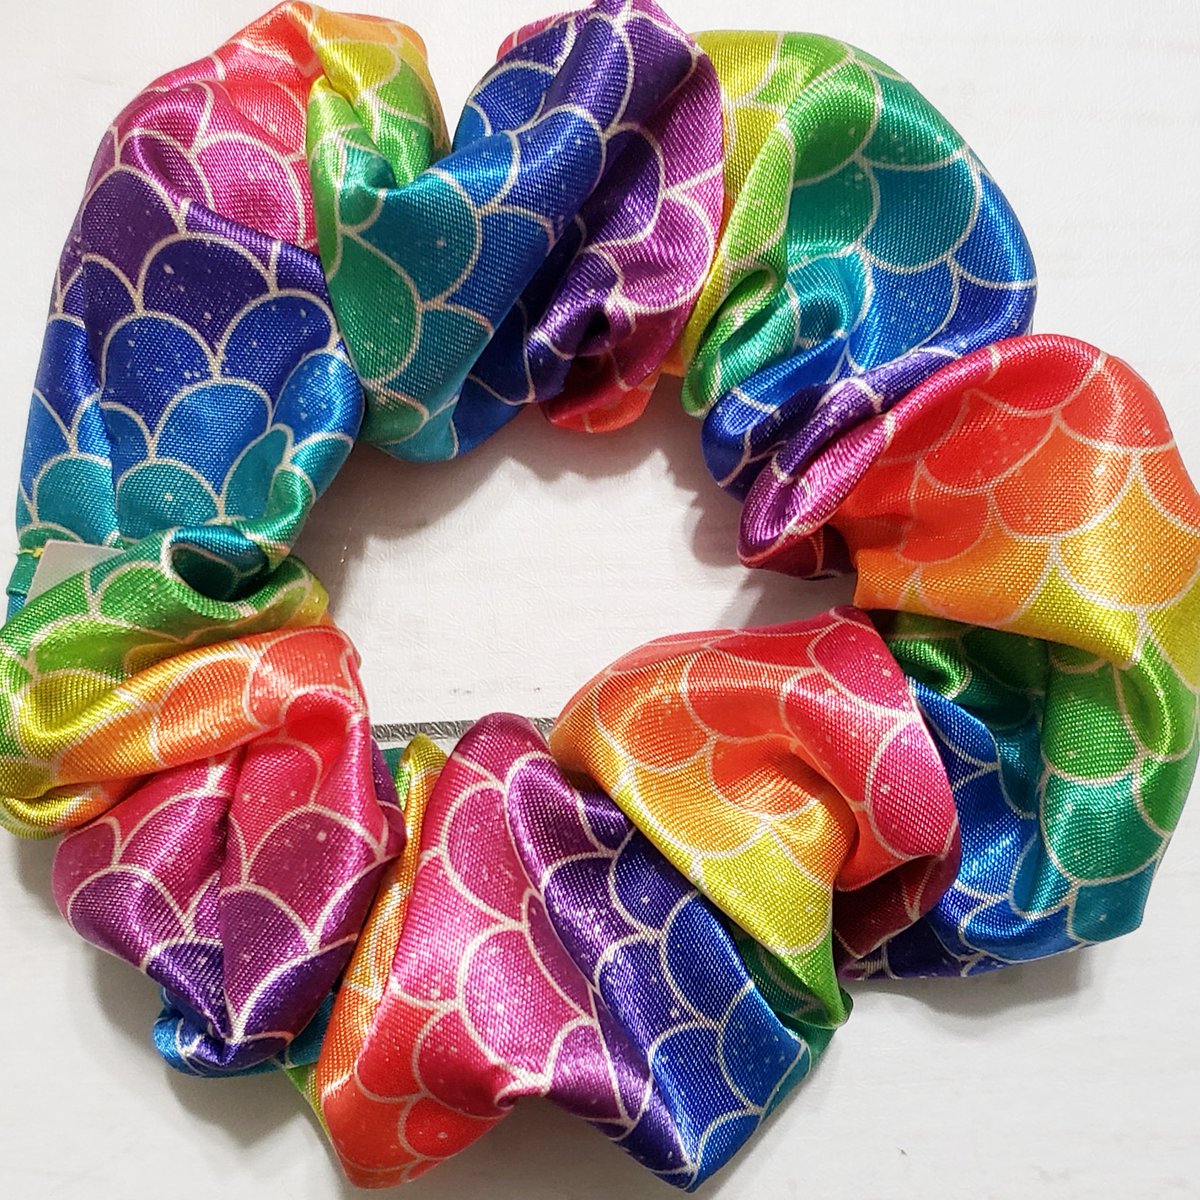 At time like these I'd rather be a mermaid 🧜‍♀️ #satinscrunchieco 
NEW this week Rainbow Mermaid Scales satin scrunchie. Shop satinscrunchieco.com 💕
#cute #scrunchies #scrunchie #scrunchielove #vscogirl #vsco #satinscrunchie #scrunchiequeen #hairaccessories #hairties #mermaids